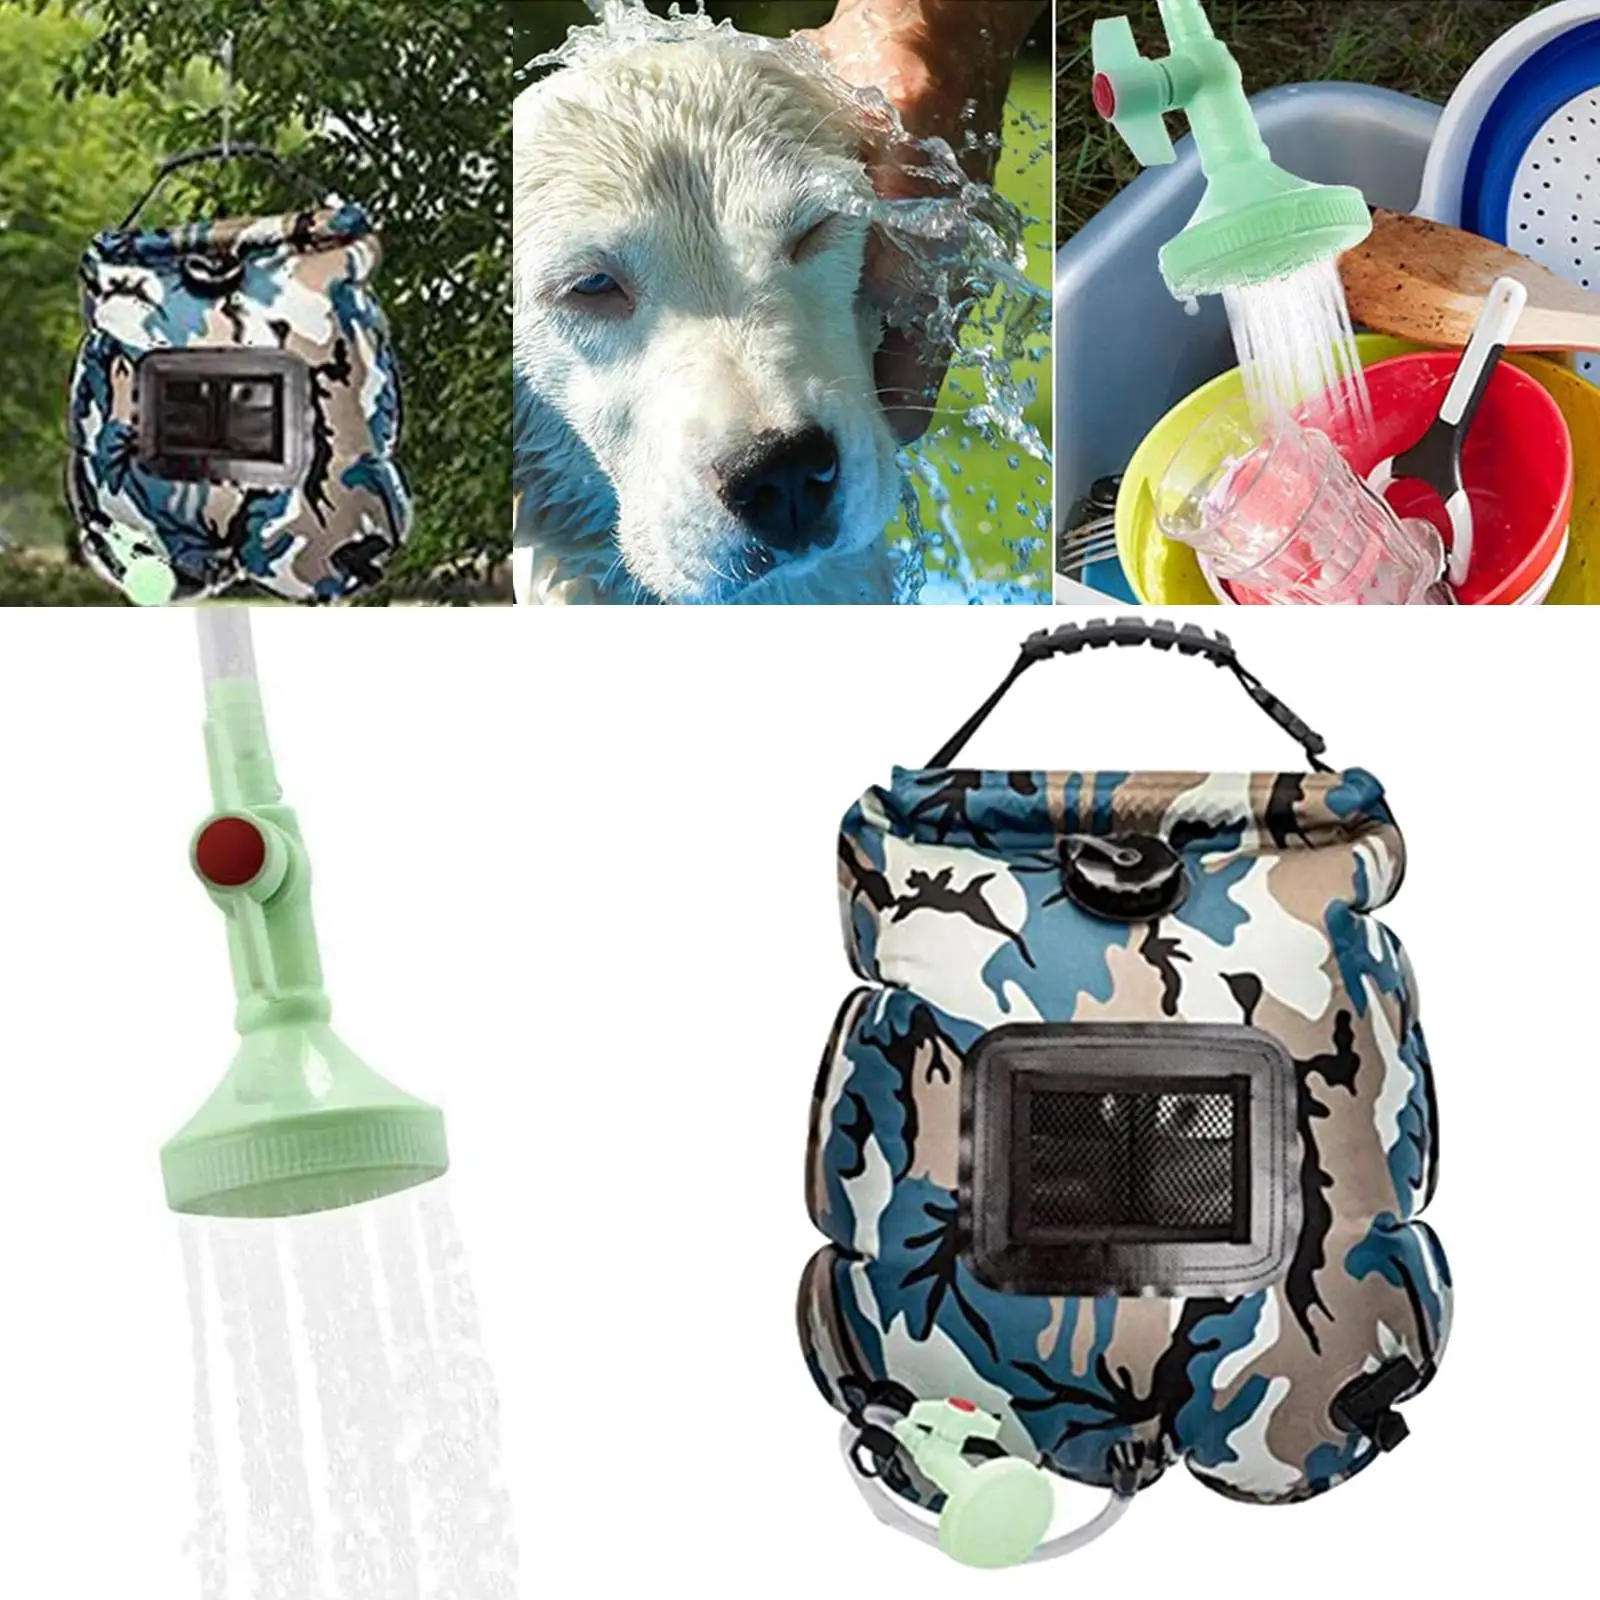 5 Gallon Solar Shower Camping Outdoor Hiking Heated Bag Travel Portable Pipe